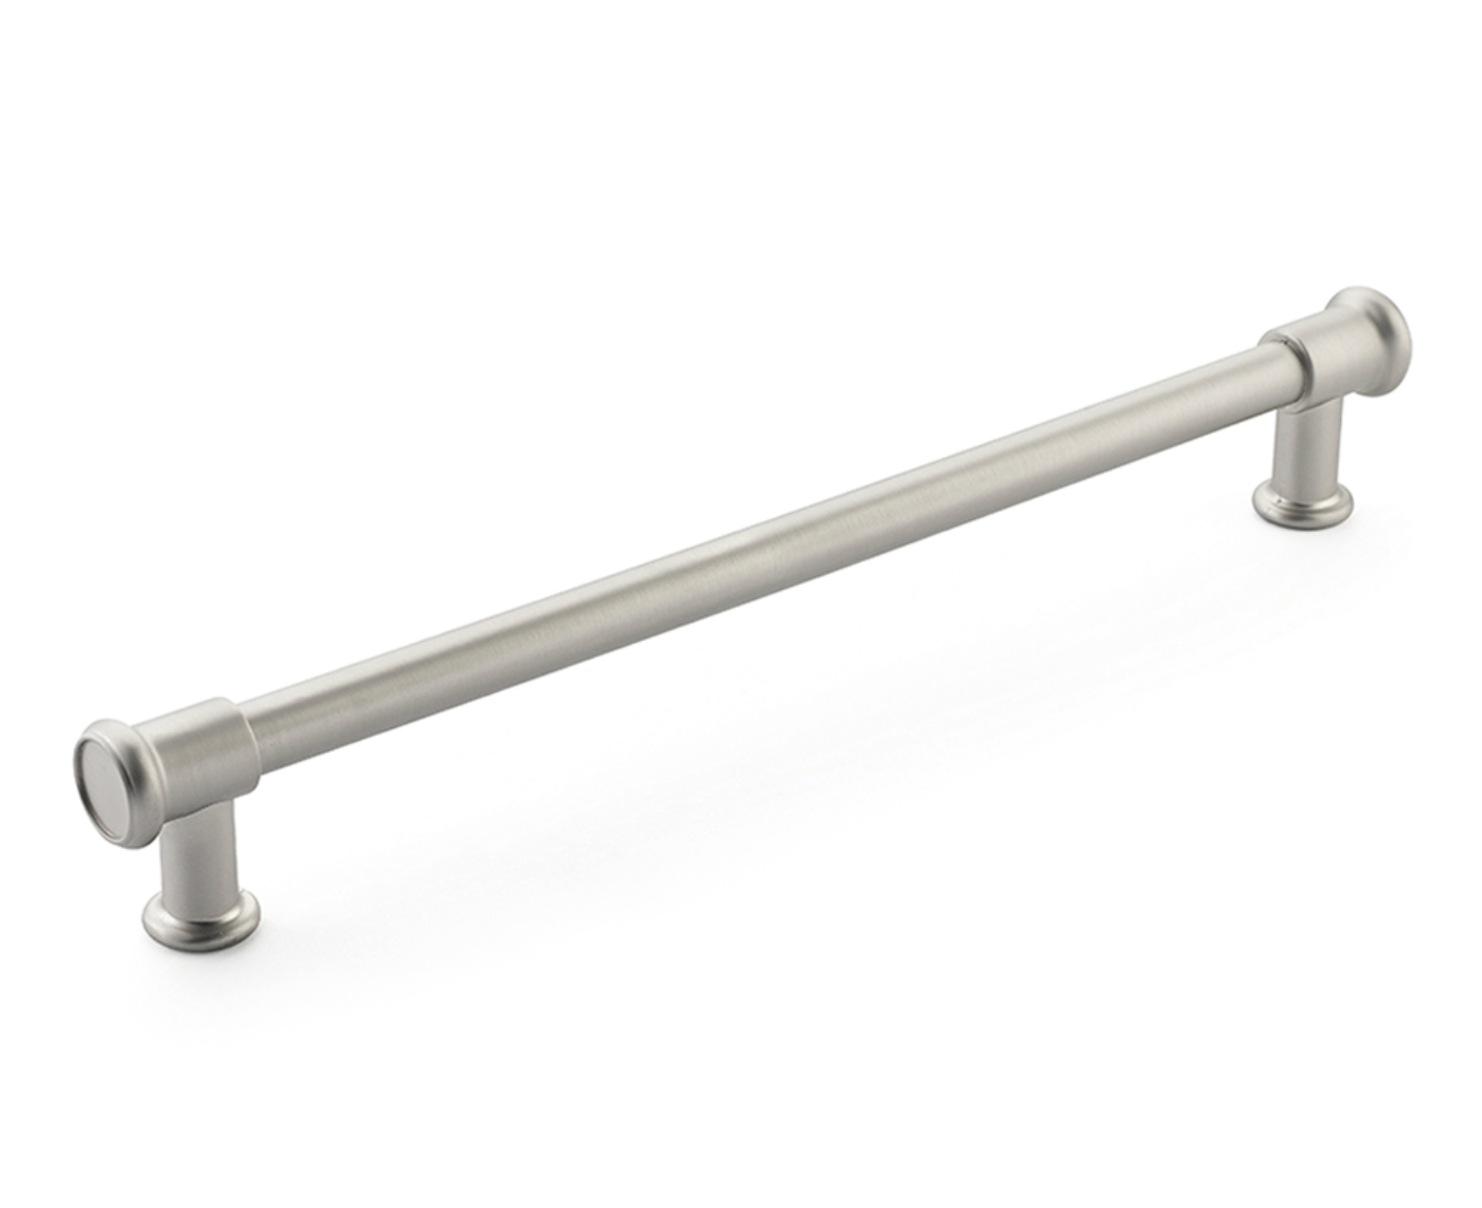 Satin Nickel "Pipe" Cabinet Knob and Drawer Pulls - Industry Hardware